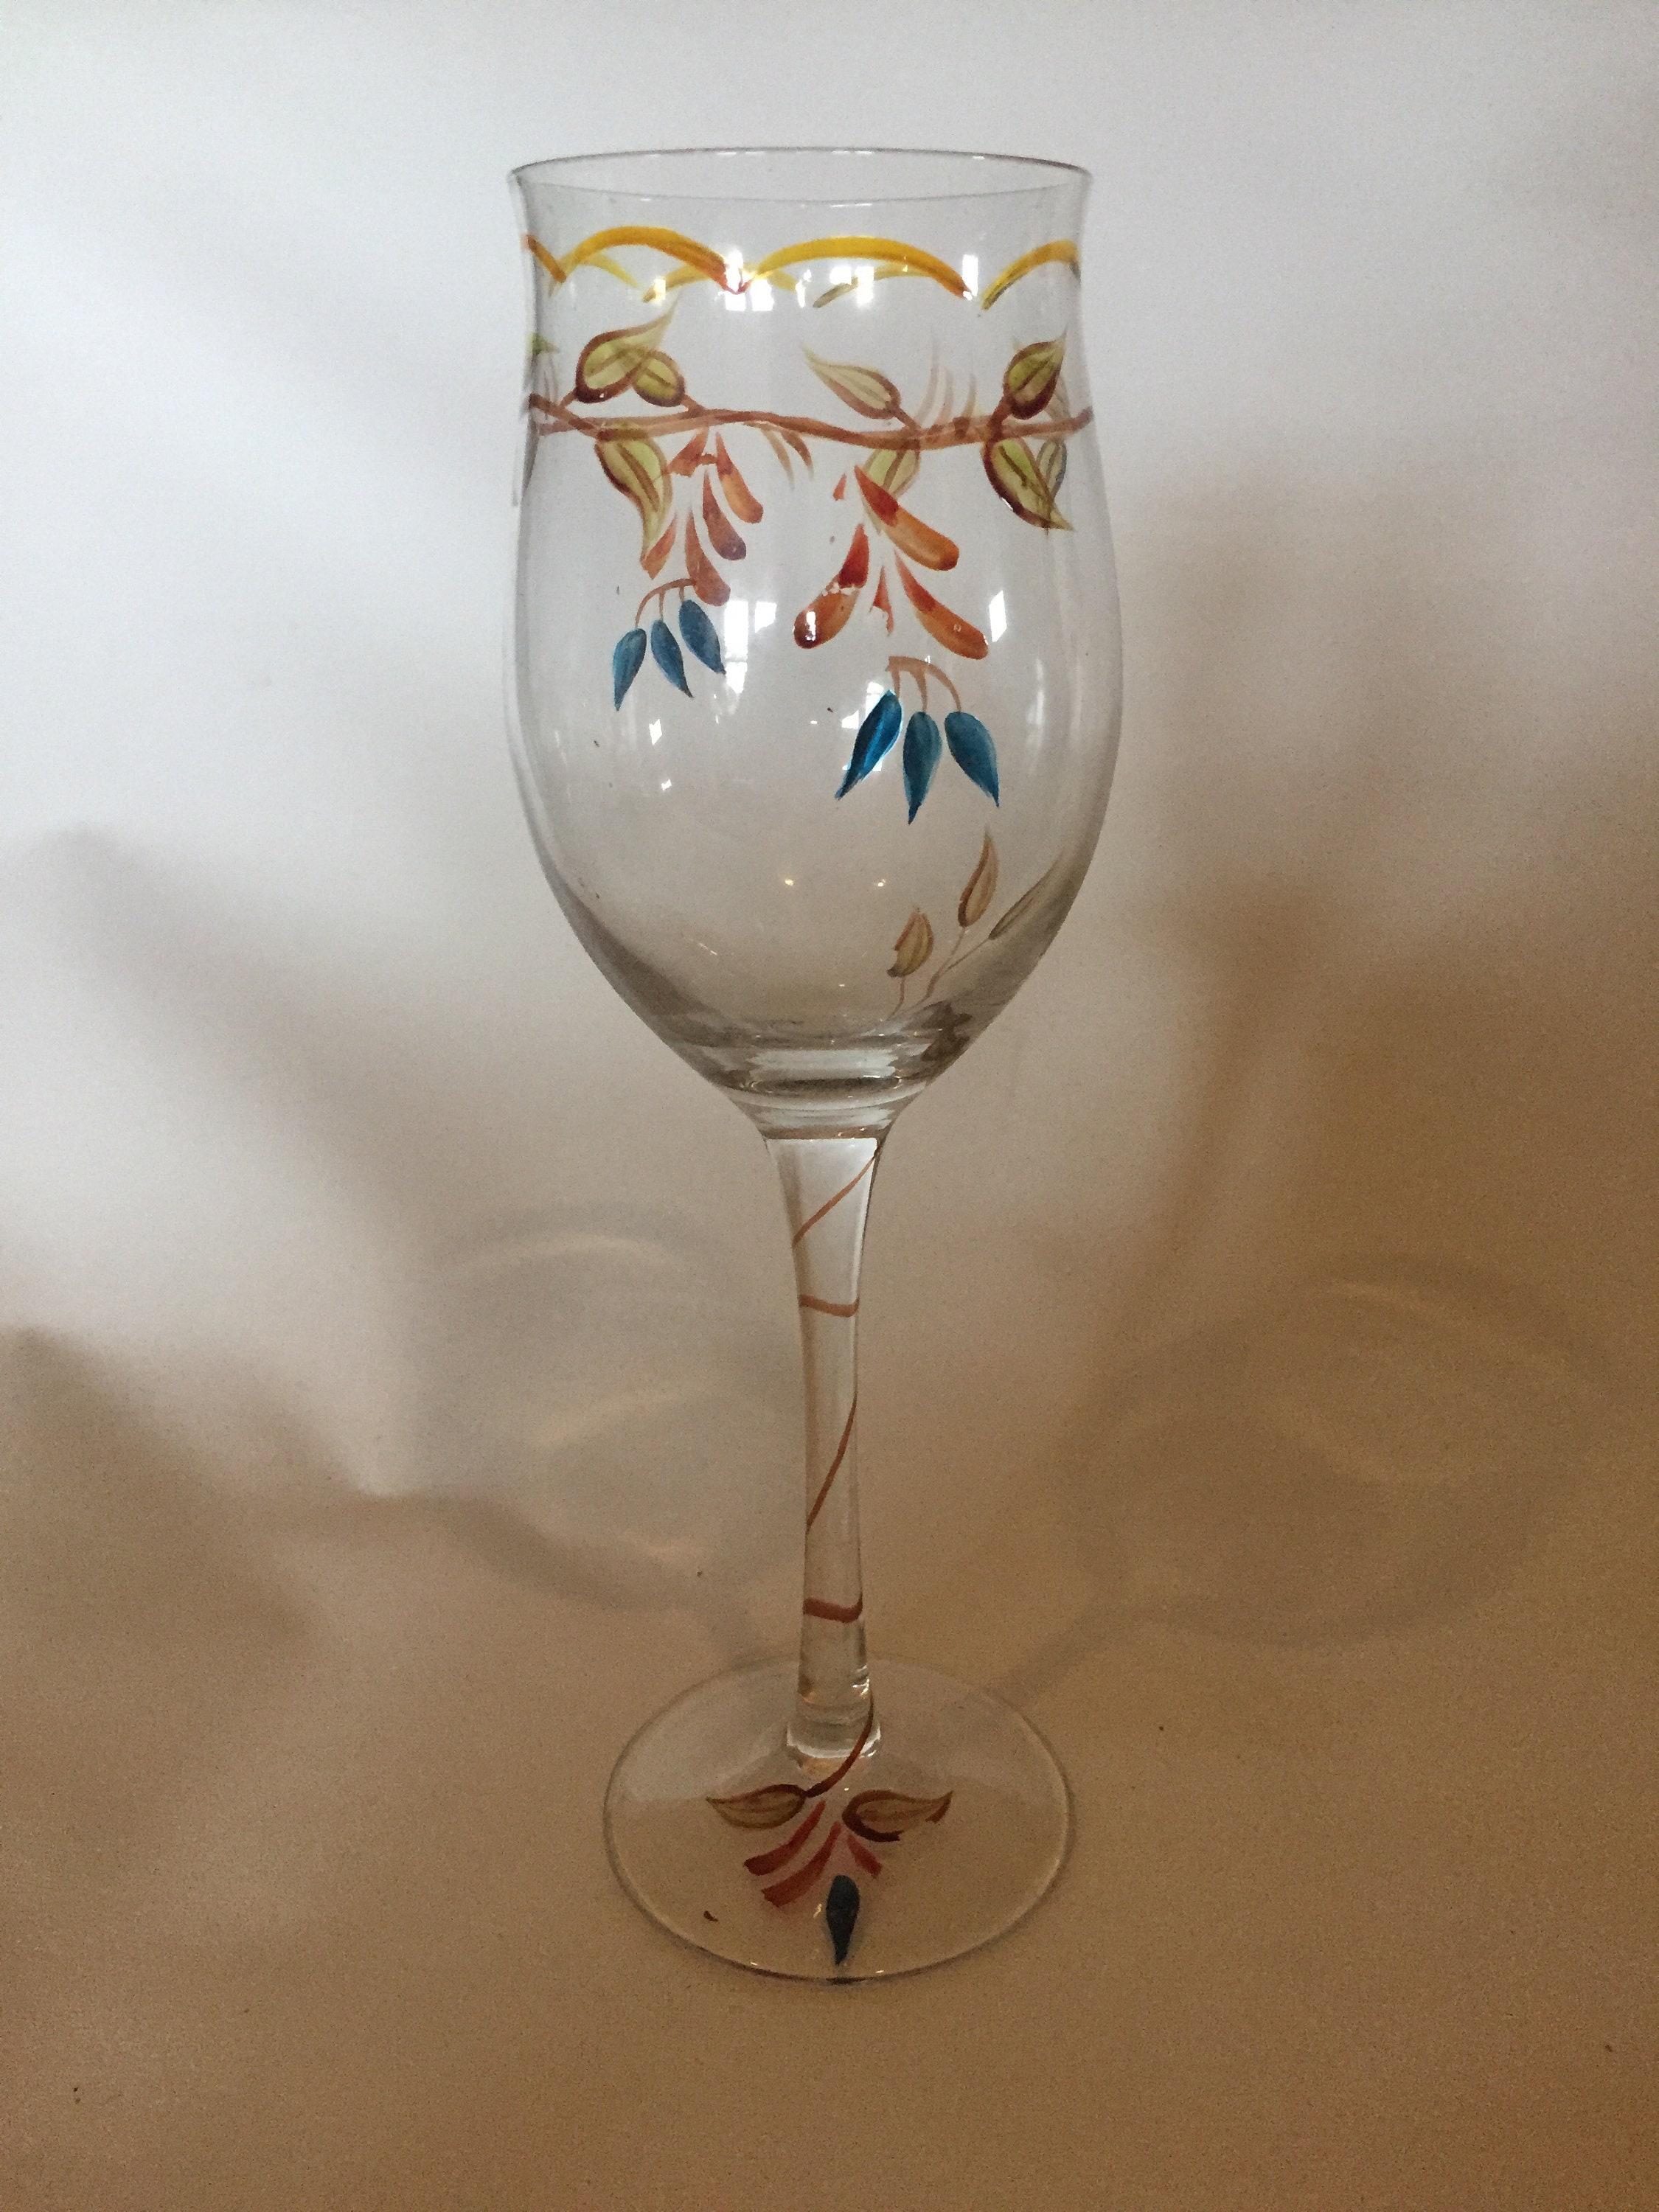 Acorn Hand-painted Wine Glasses – Glorious Goblets